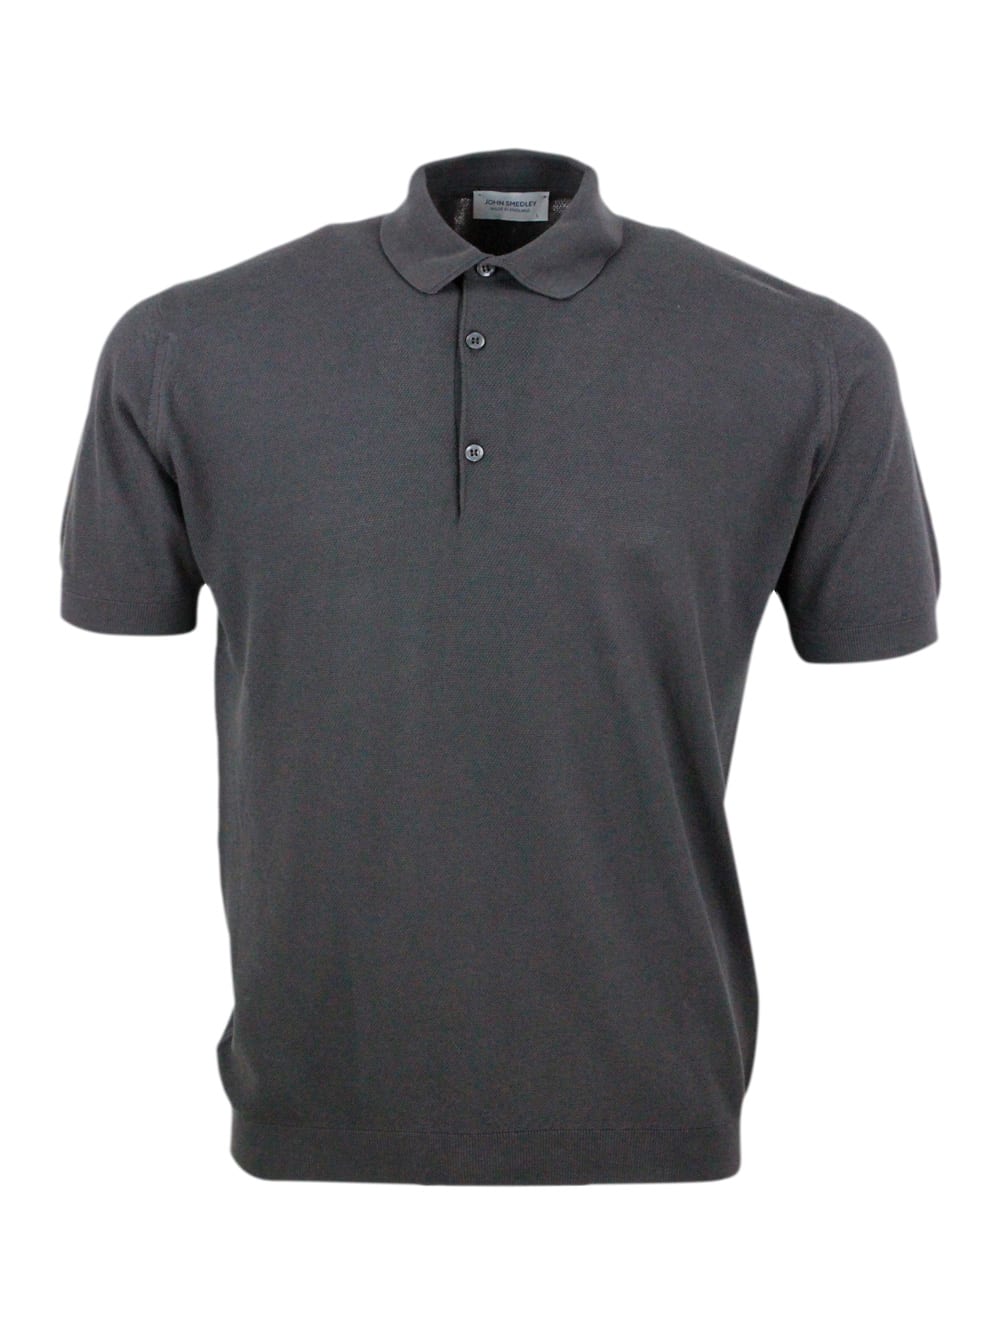 John Smedley Short-sleeved Polo Shirt In Extrafine Piqué Cotton Thread With Three Buttons In Chocolate